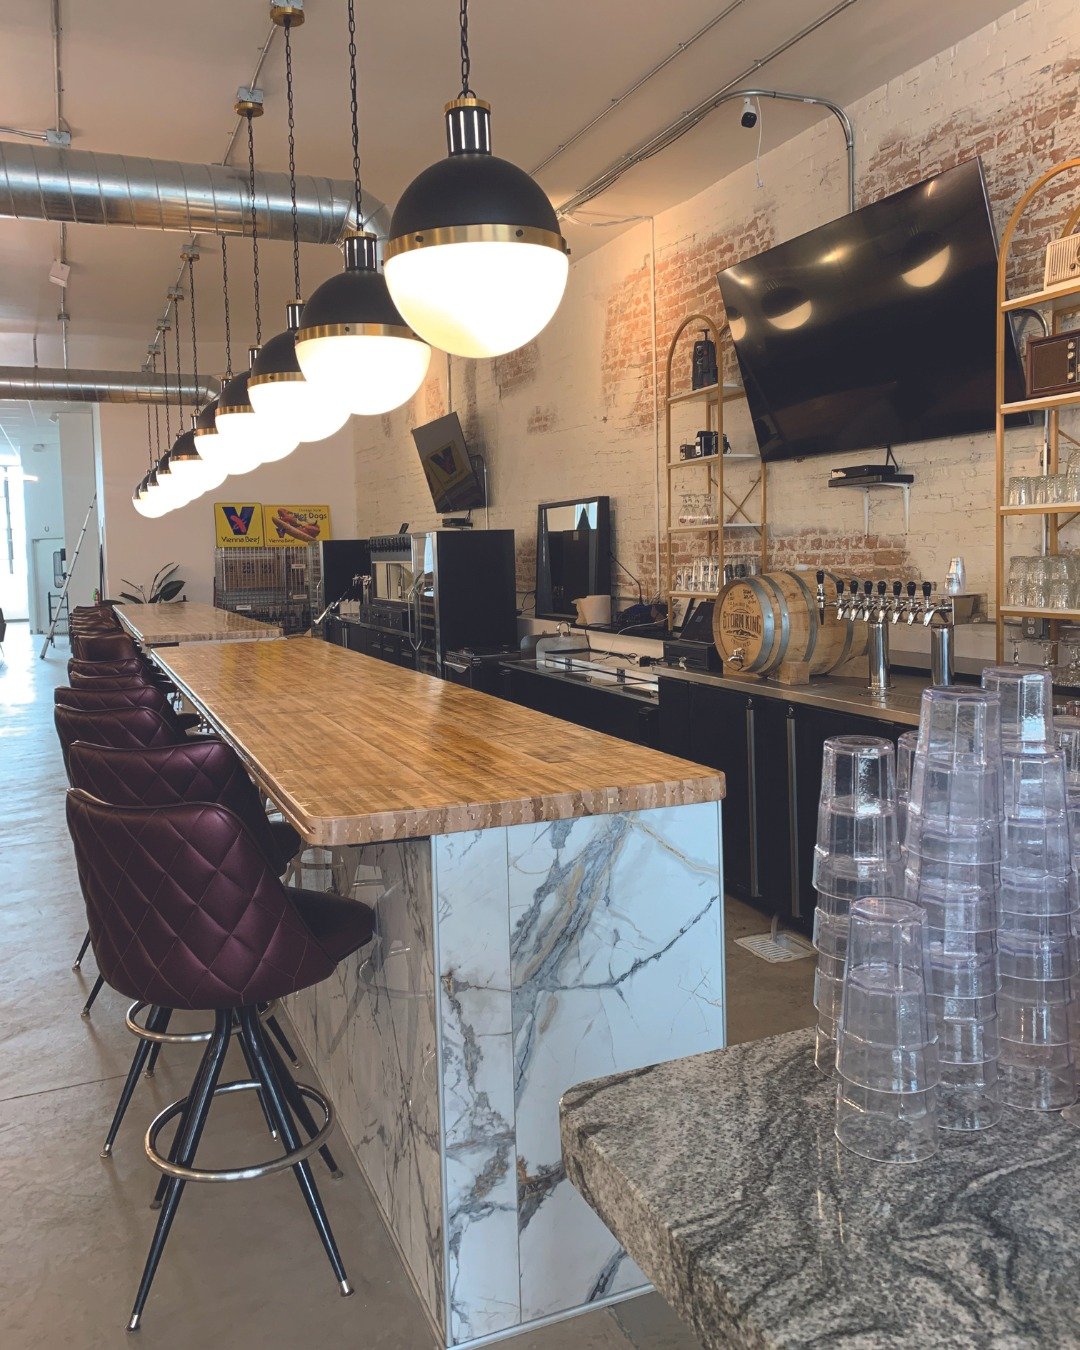 We&rsquo;re excited to welcome Cruise Control Kitchen &amp; Cellar (@cruisecontrolgj) to downtown Grand Junction&rsquo;s growing culinary scene. This fresh concept is a fast-casual wine bar in the heart of the Grand Valley.

Owner Taryn Brooks is exc